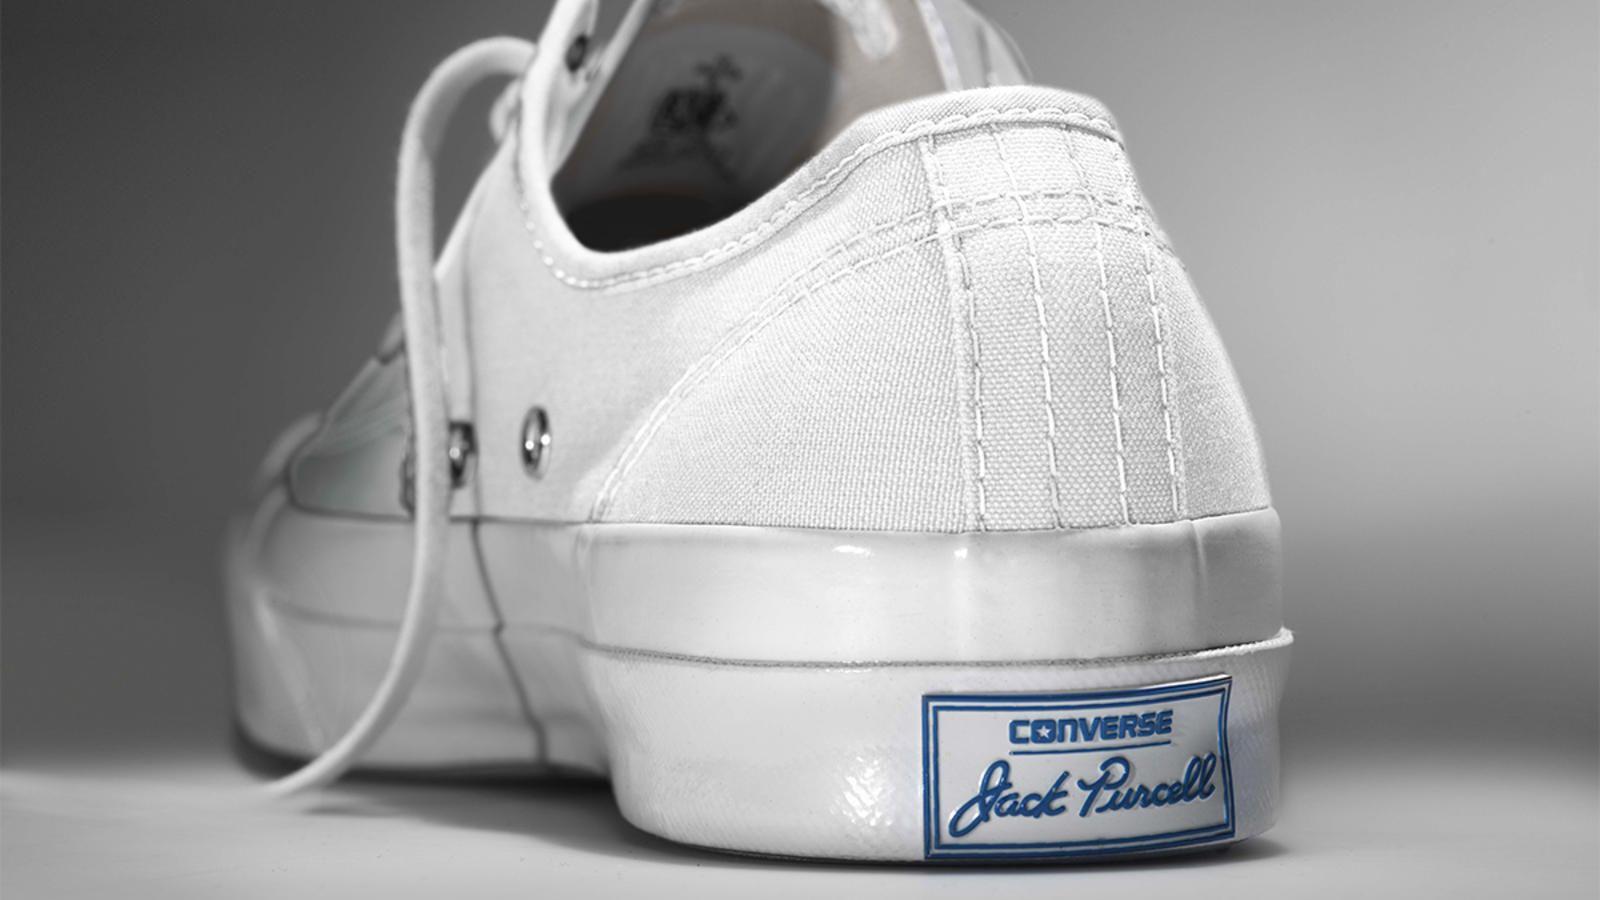 Purcell Logo - CONVERSE DEBUTS THE JACK PURCELL SIGNATURE SNEAKER